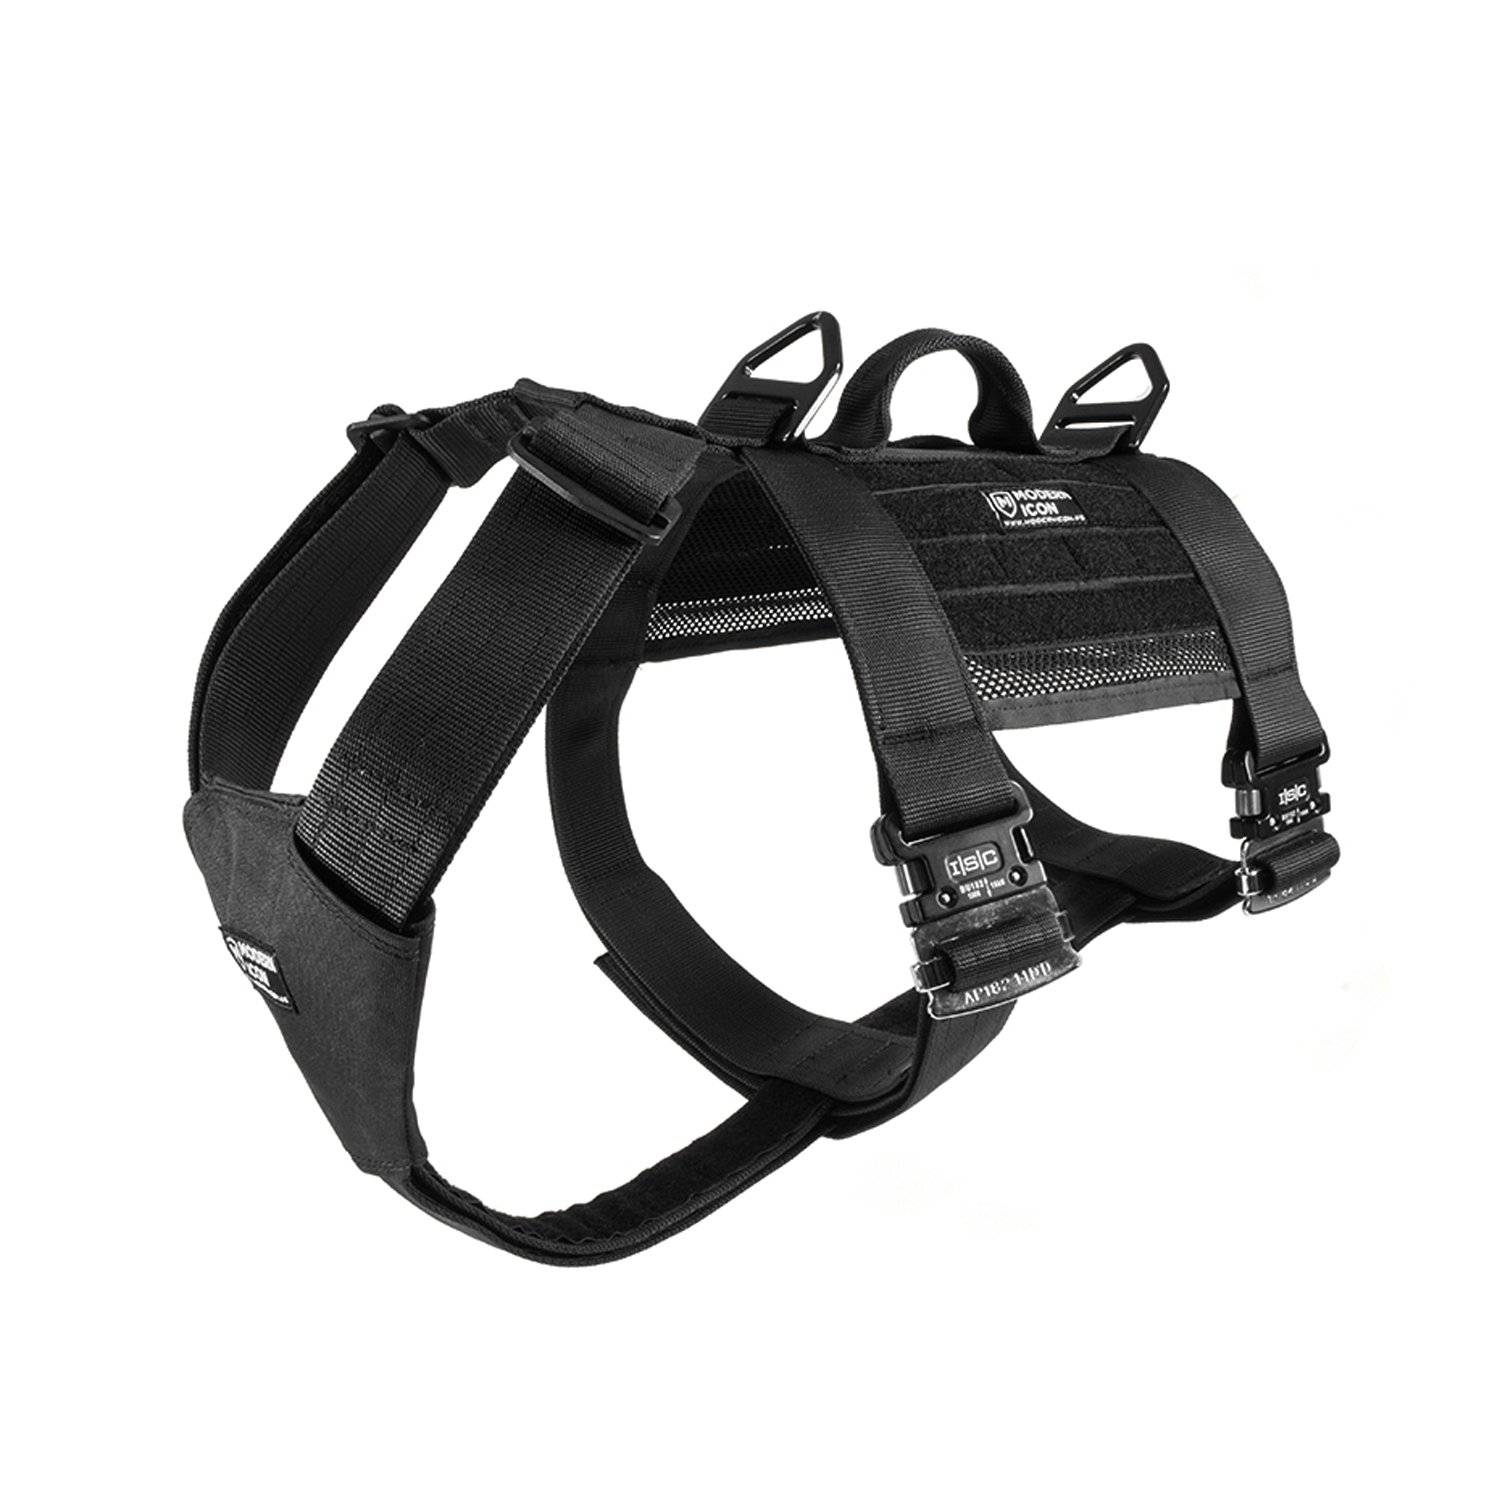 Modern Icon K9 Tracking Harness